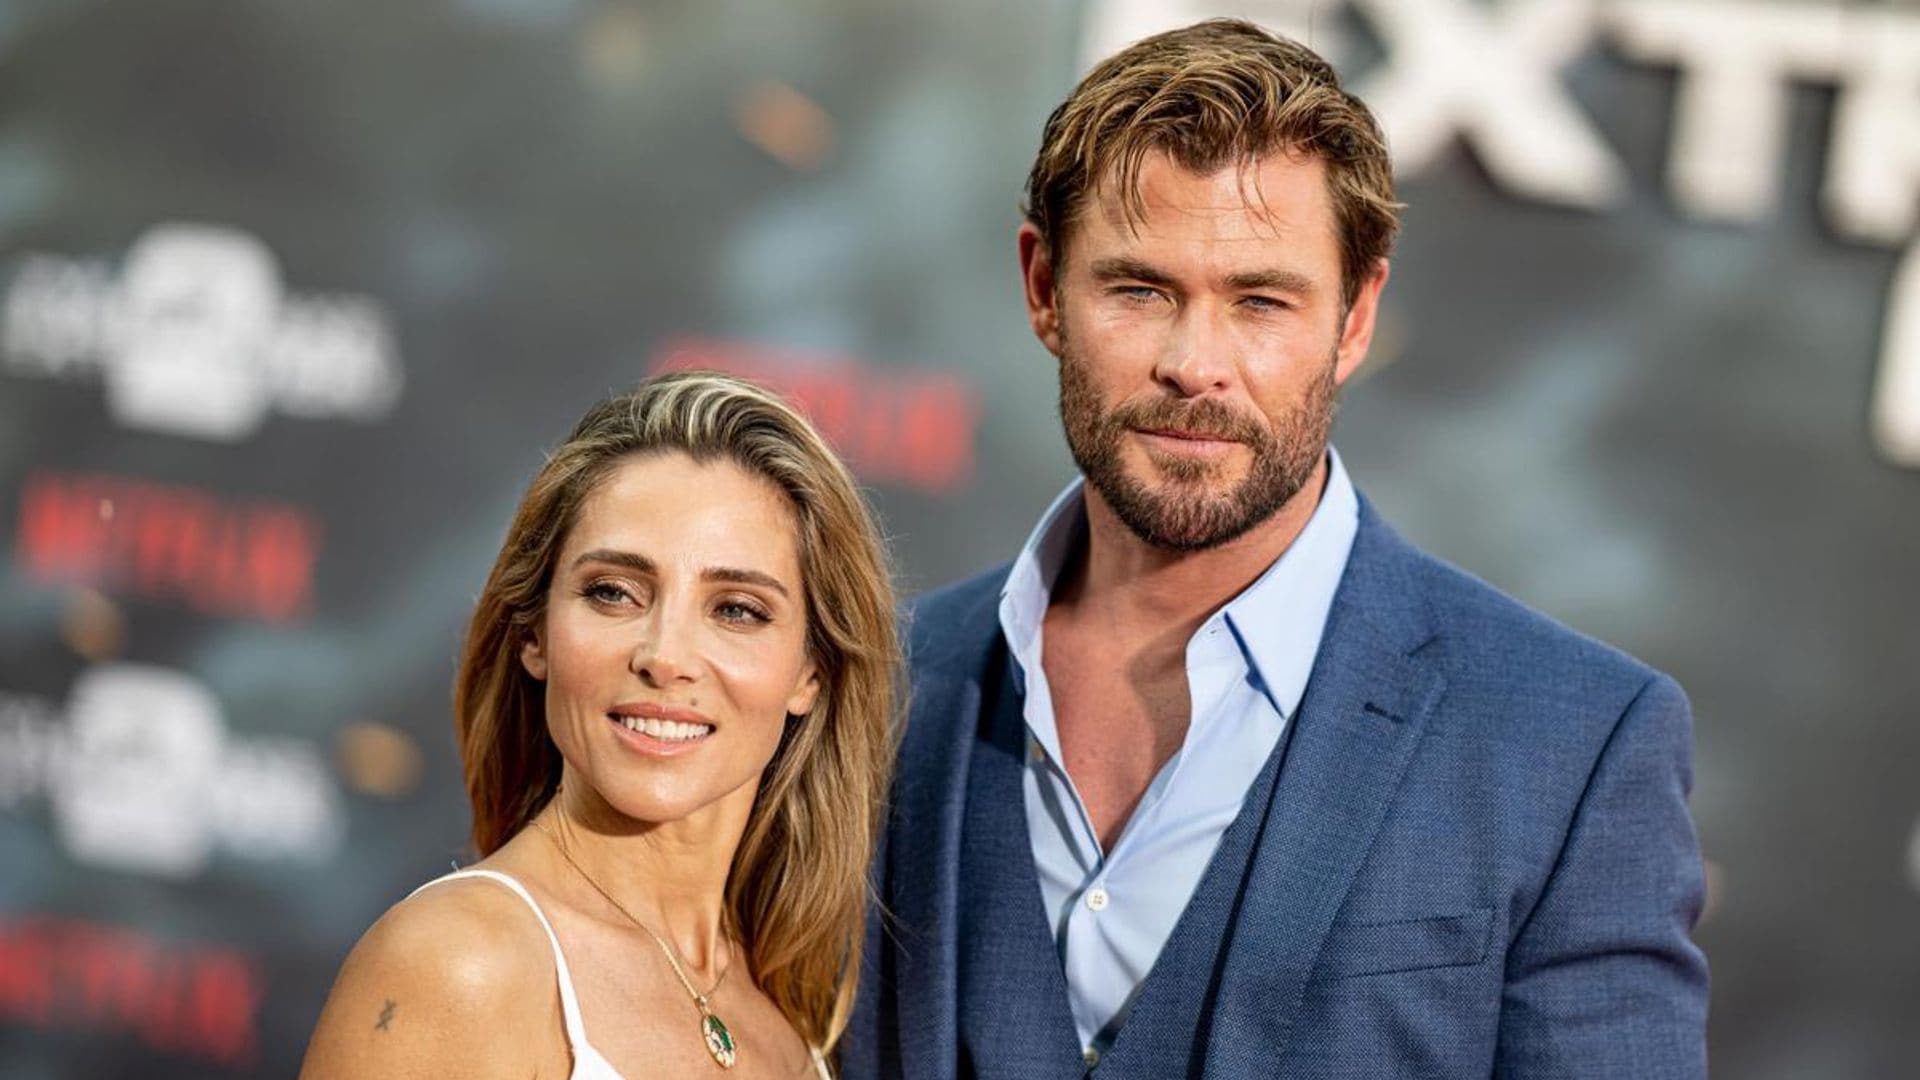 Will Elsa Pataky join Chris Hemsworth at the Oscars this weekend?